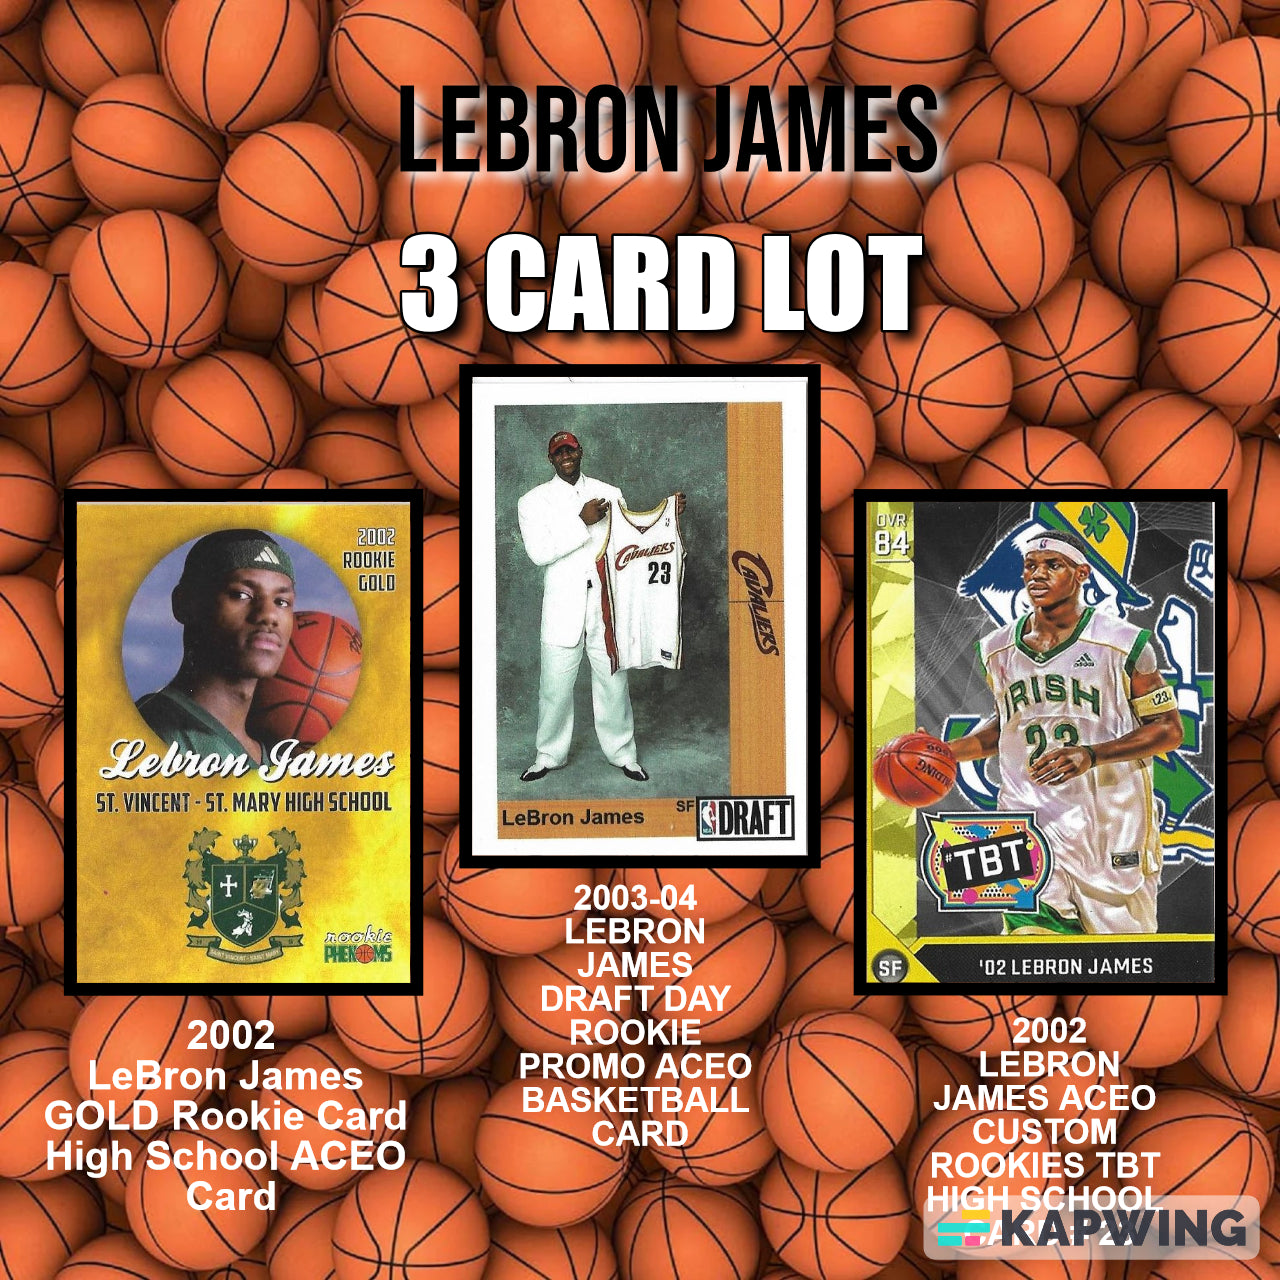 LeBRON JAMES 3 CARD LOT - EARLY ACEO CARDS - $1.25